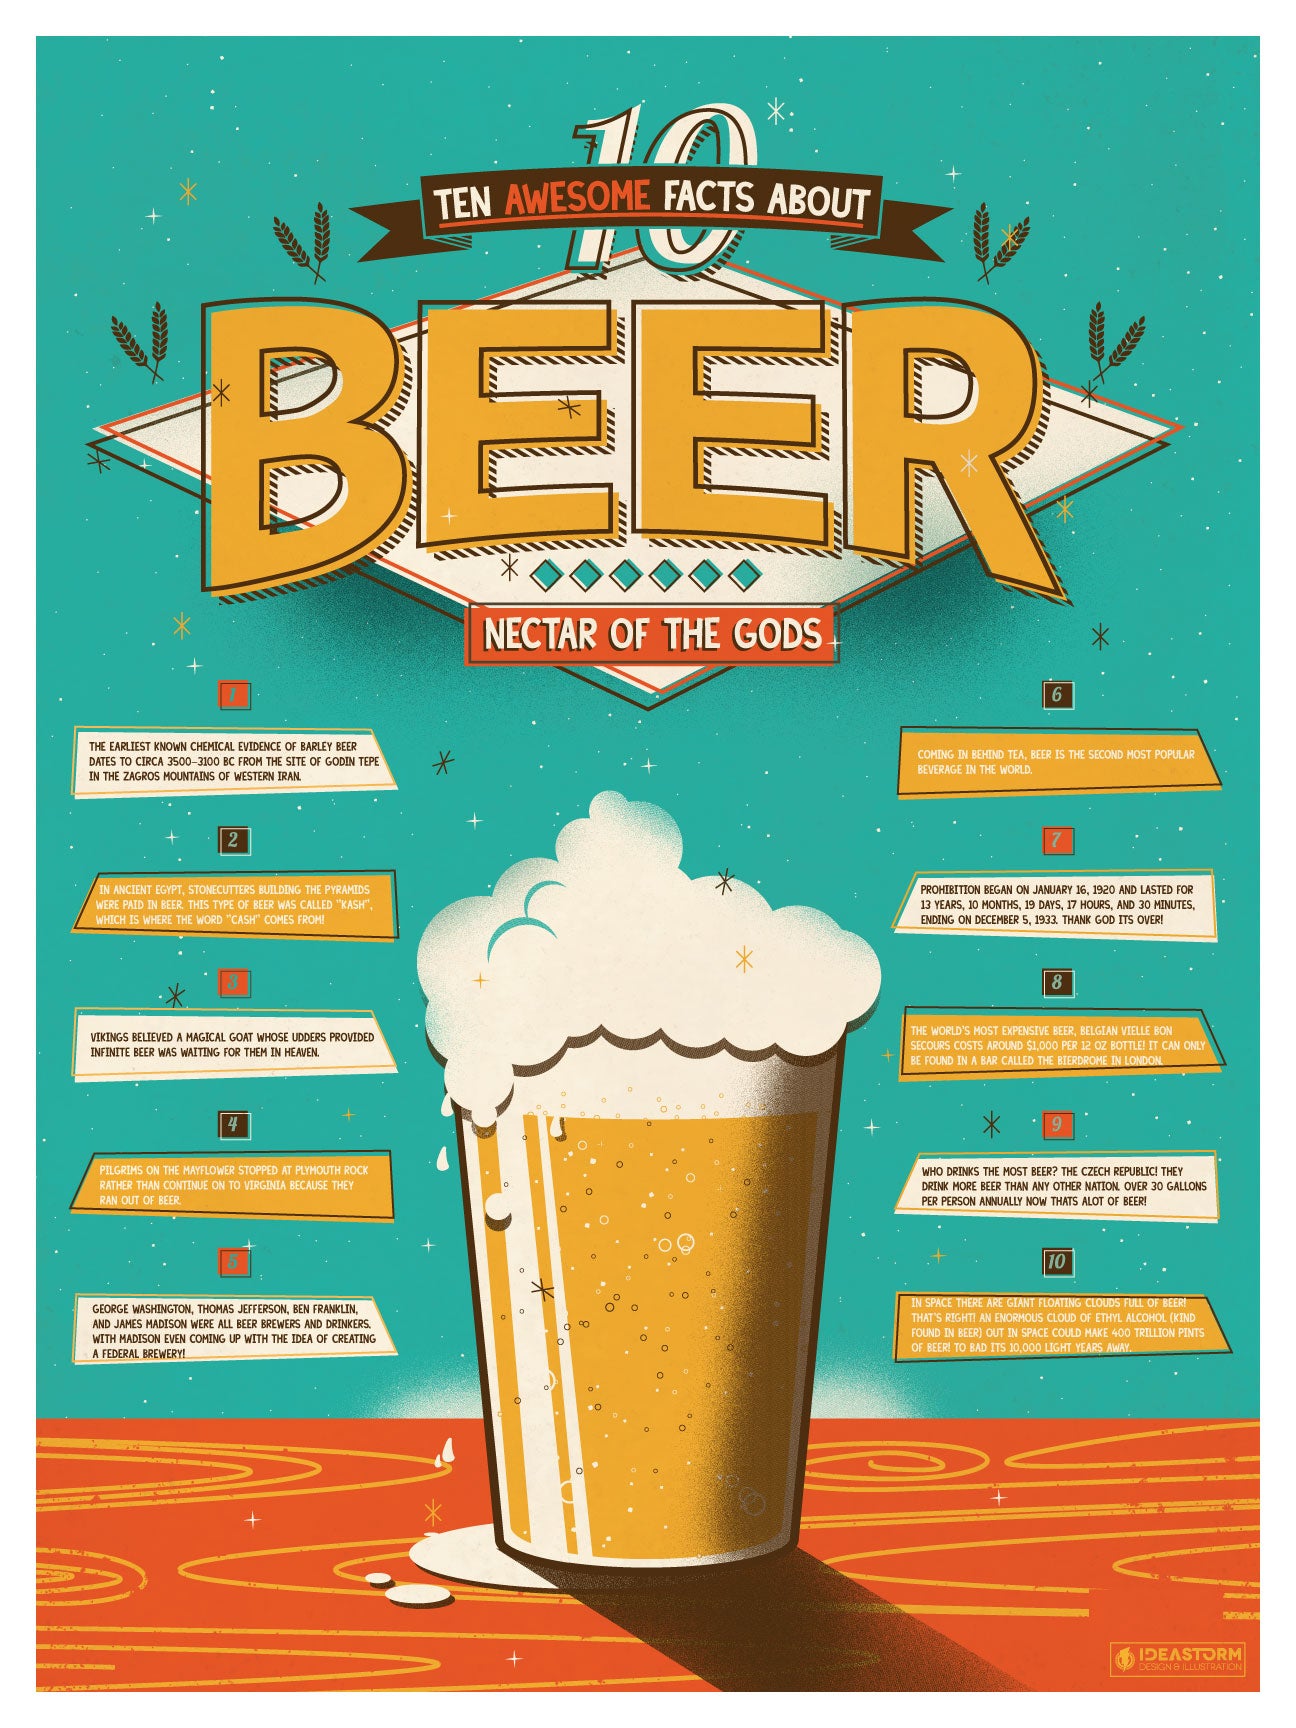 10 Awesome Facts About Beer Poster / IdeaStorm Media Store